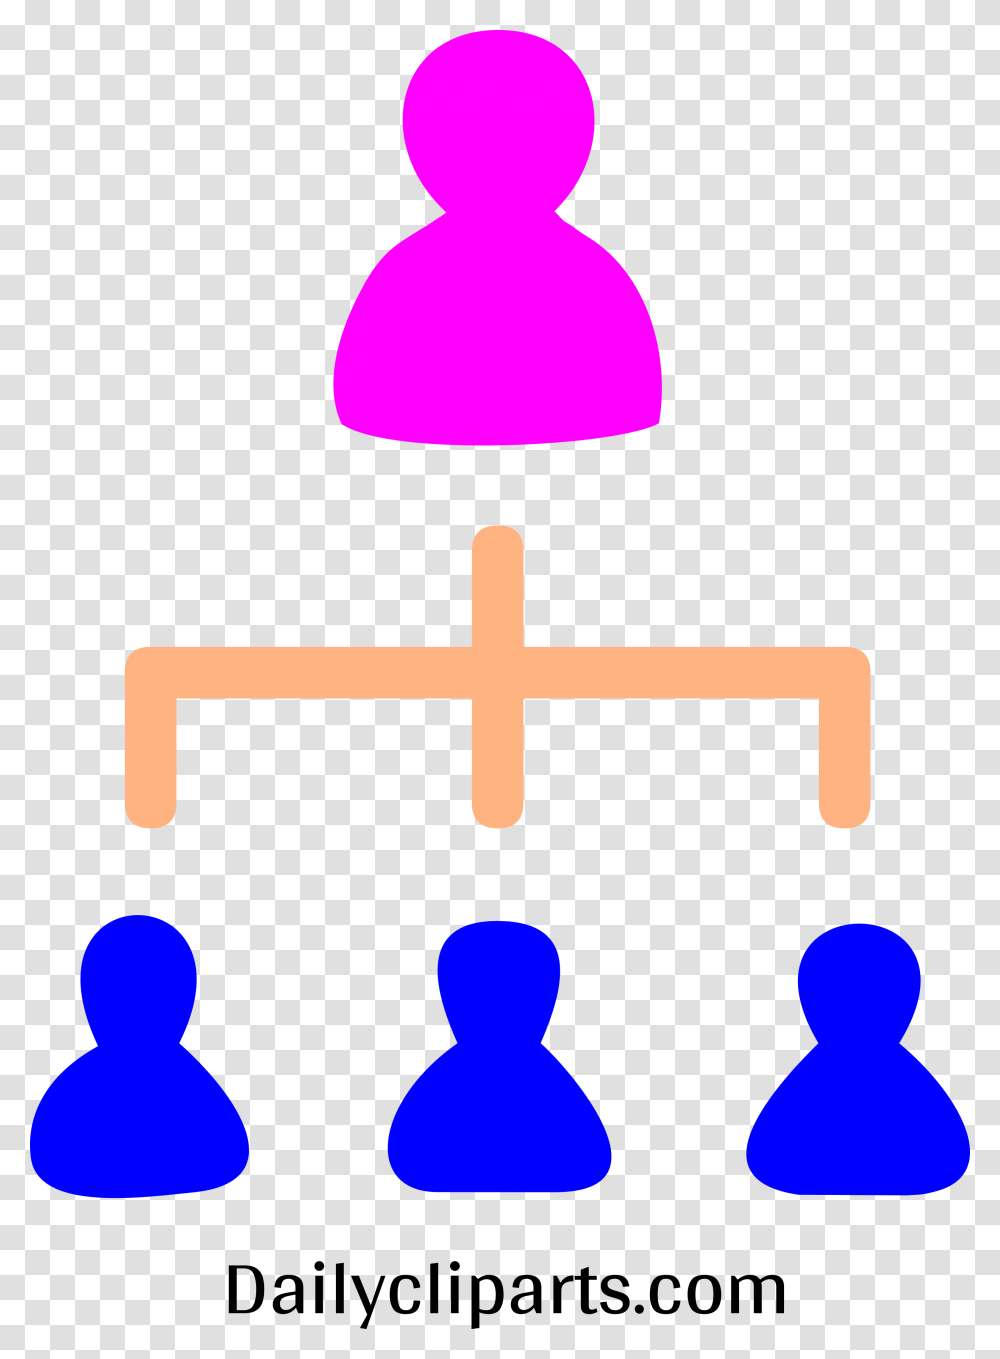 Female Boss 3 Male Managers Office Hierarchy Icon Image, Lamp, Cross, Toy Transparent Png